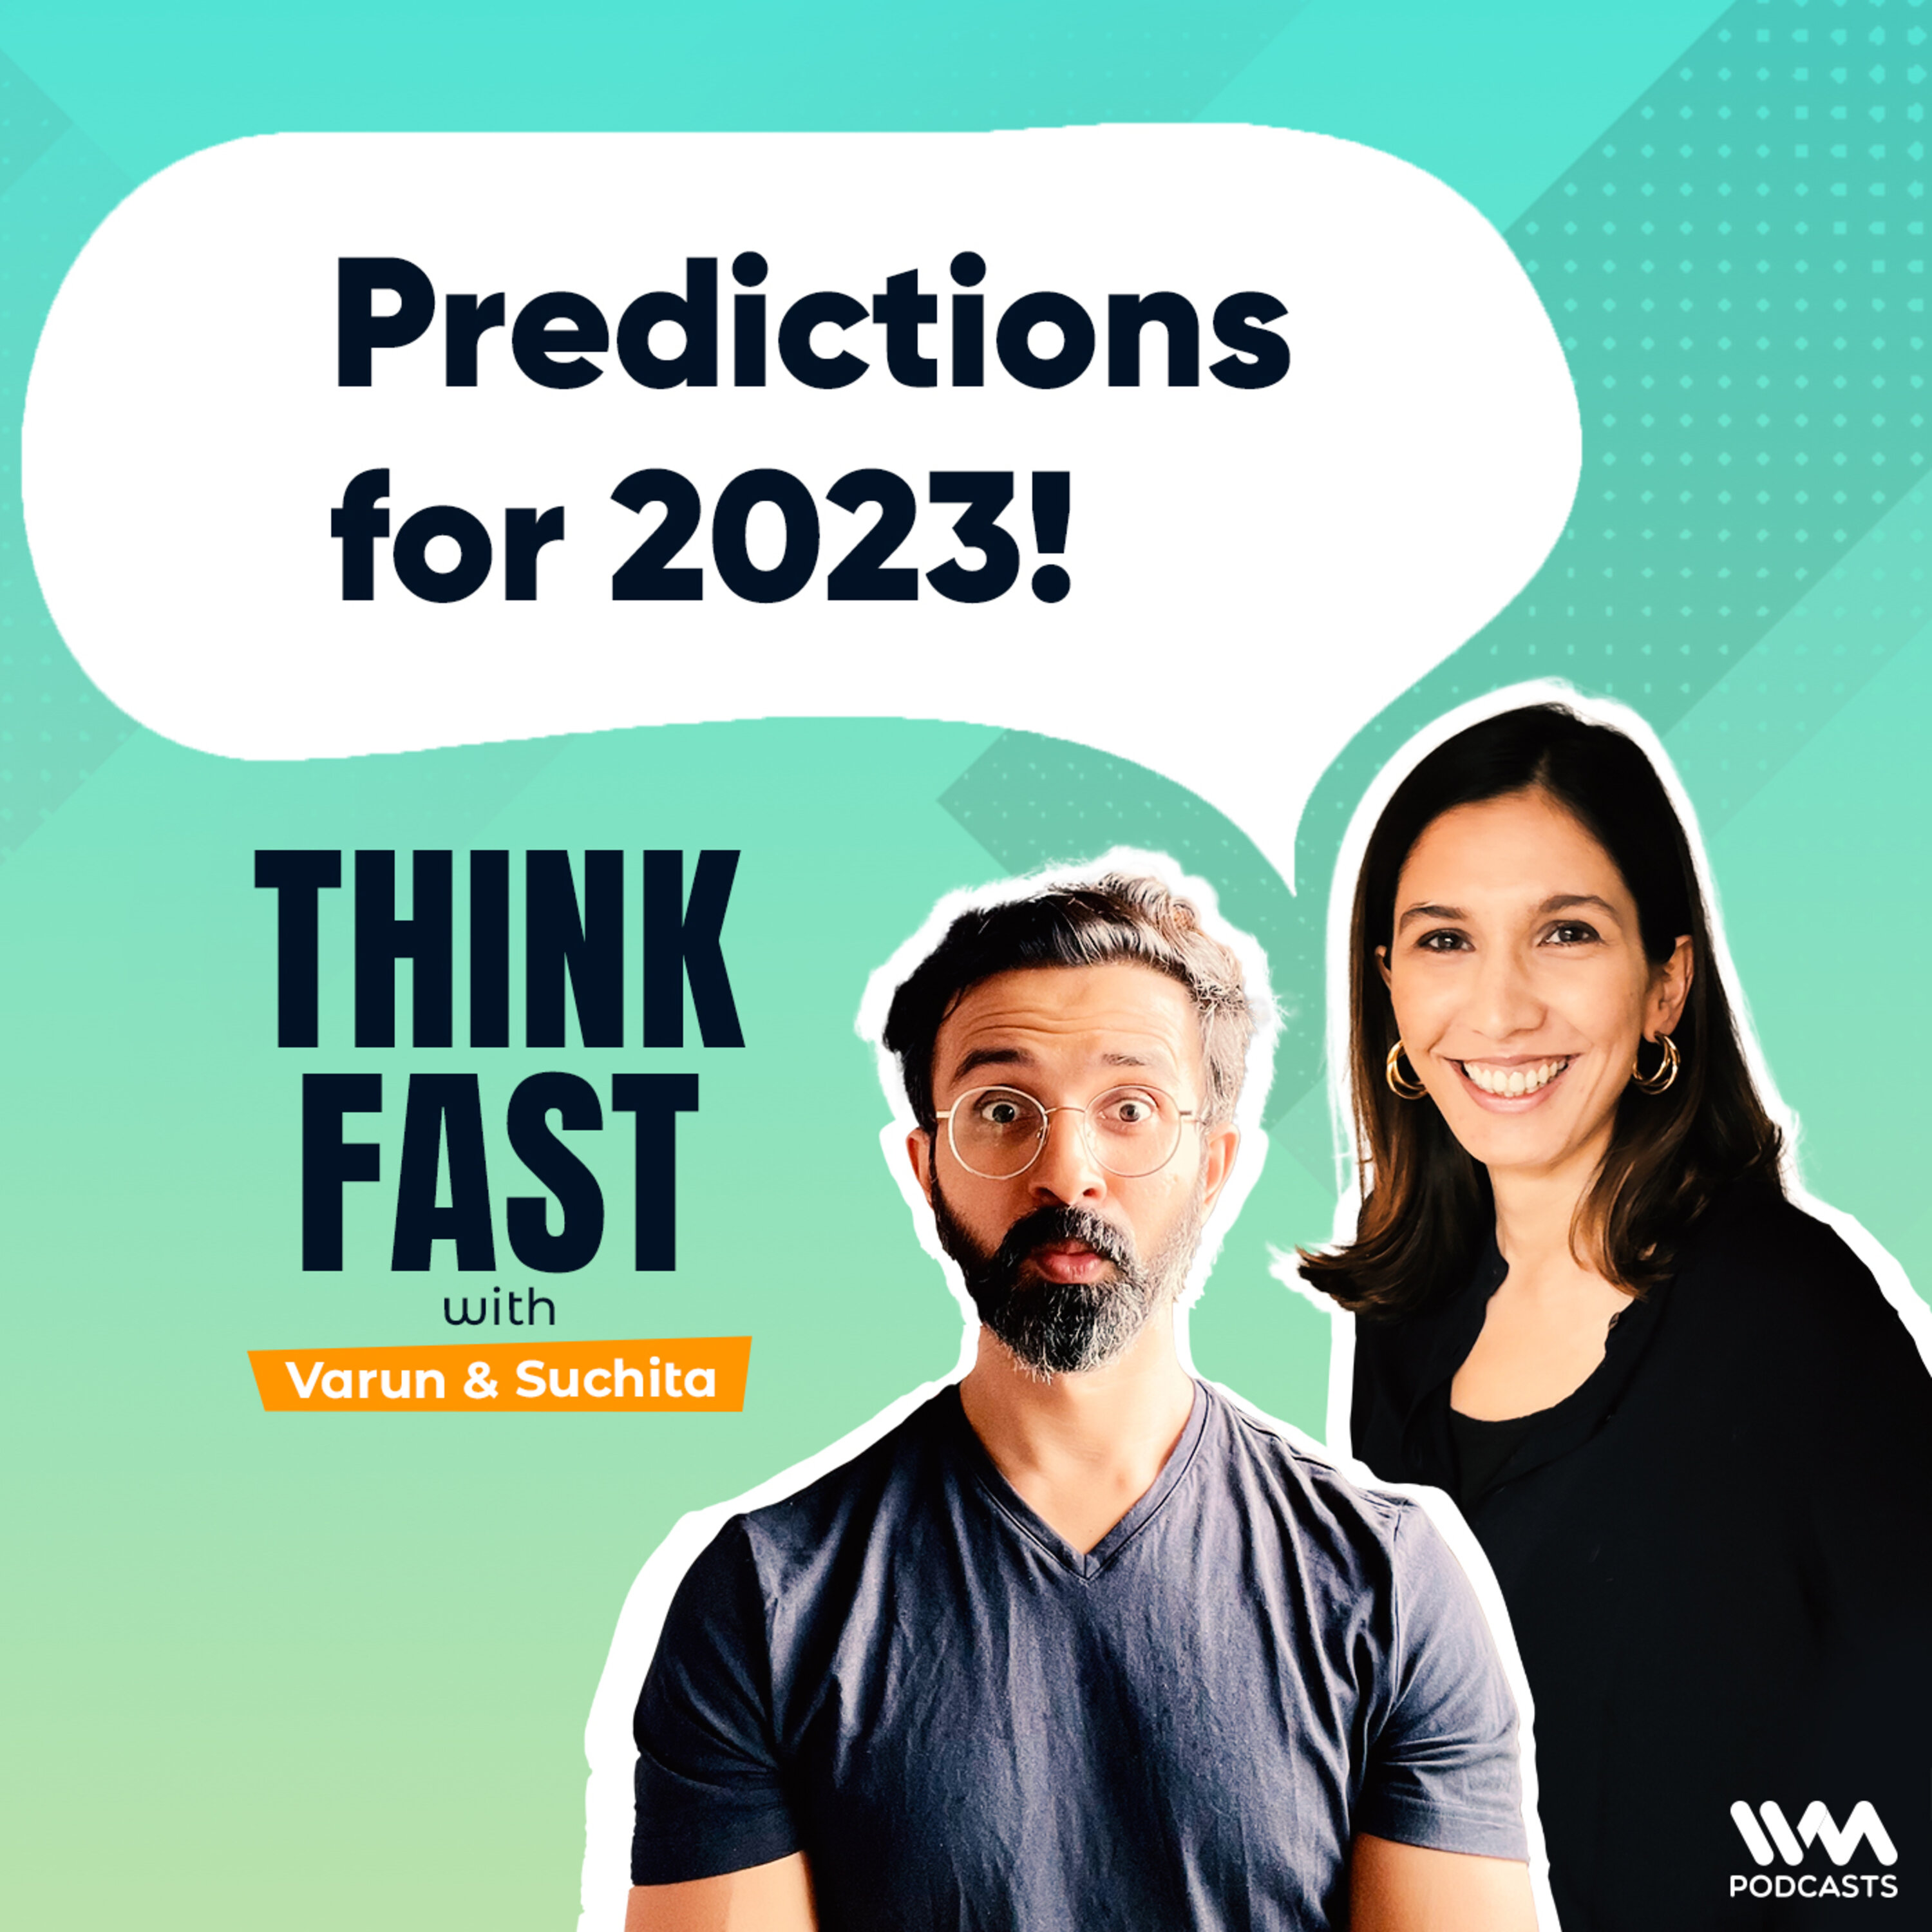 Predictions for 2023!